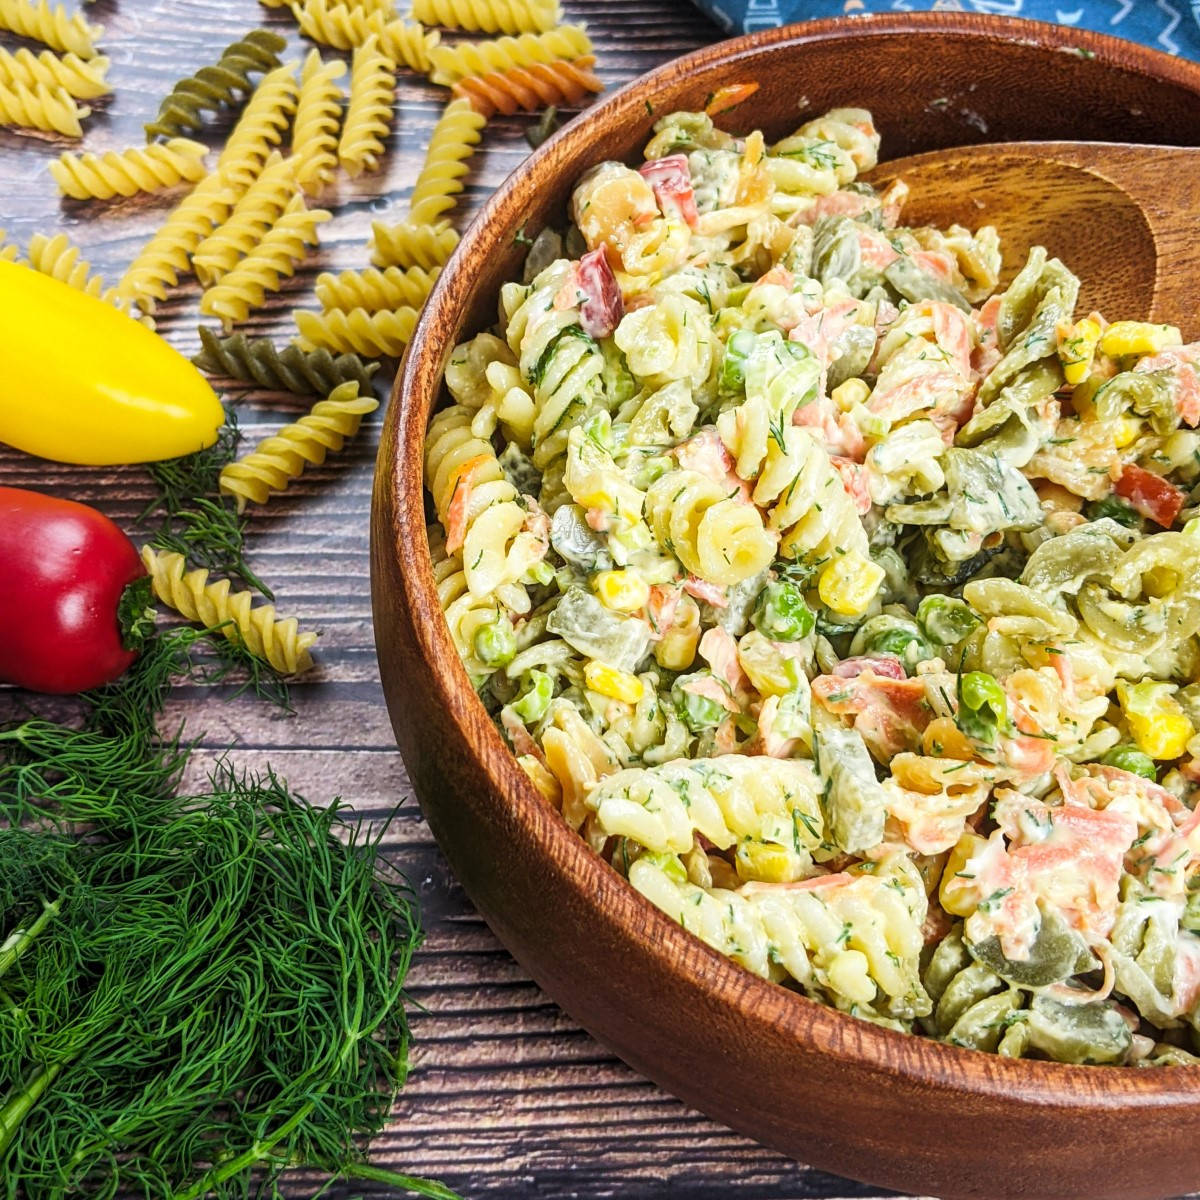 Fusilli pasta salad served in wooden bowl next to fresh dill, peppers and tricolore fusilli pasta.